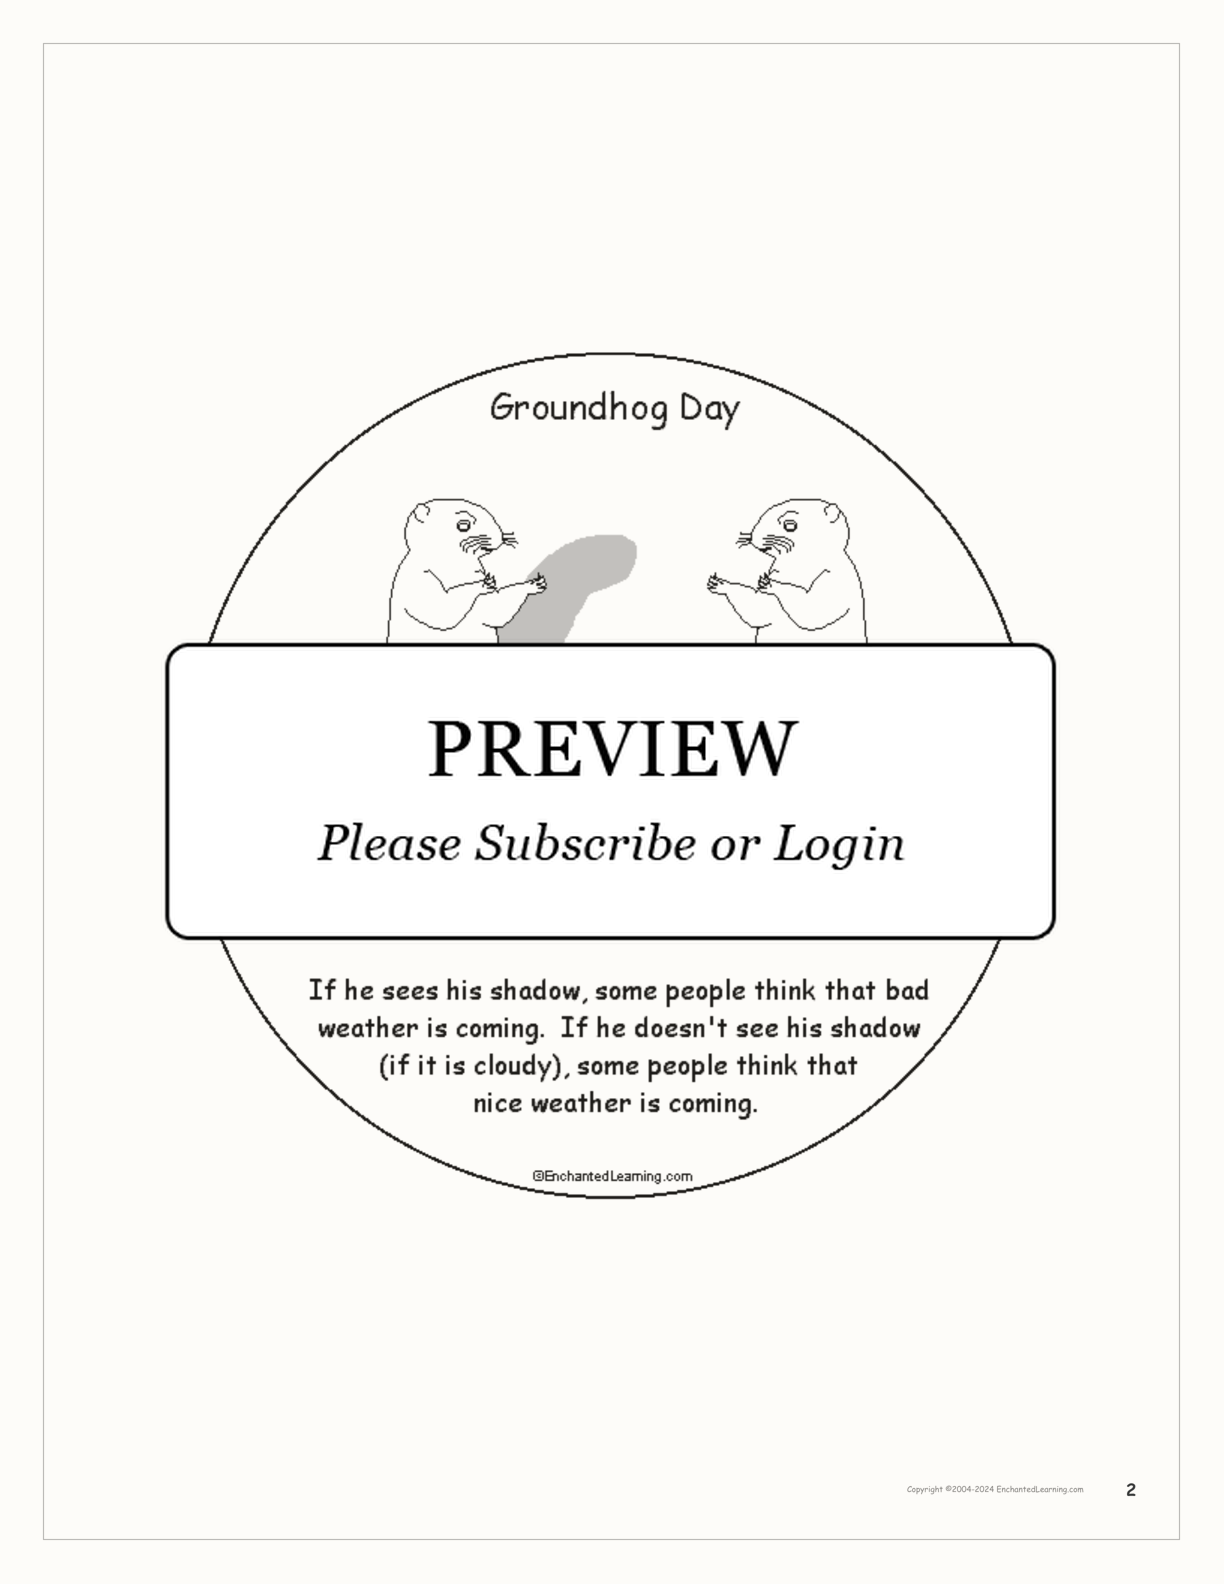 Groundhog Day Activity Book interactive printout page 2